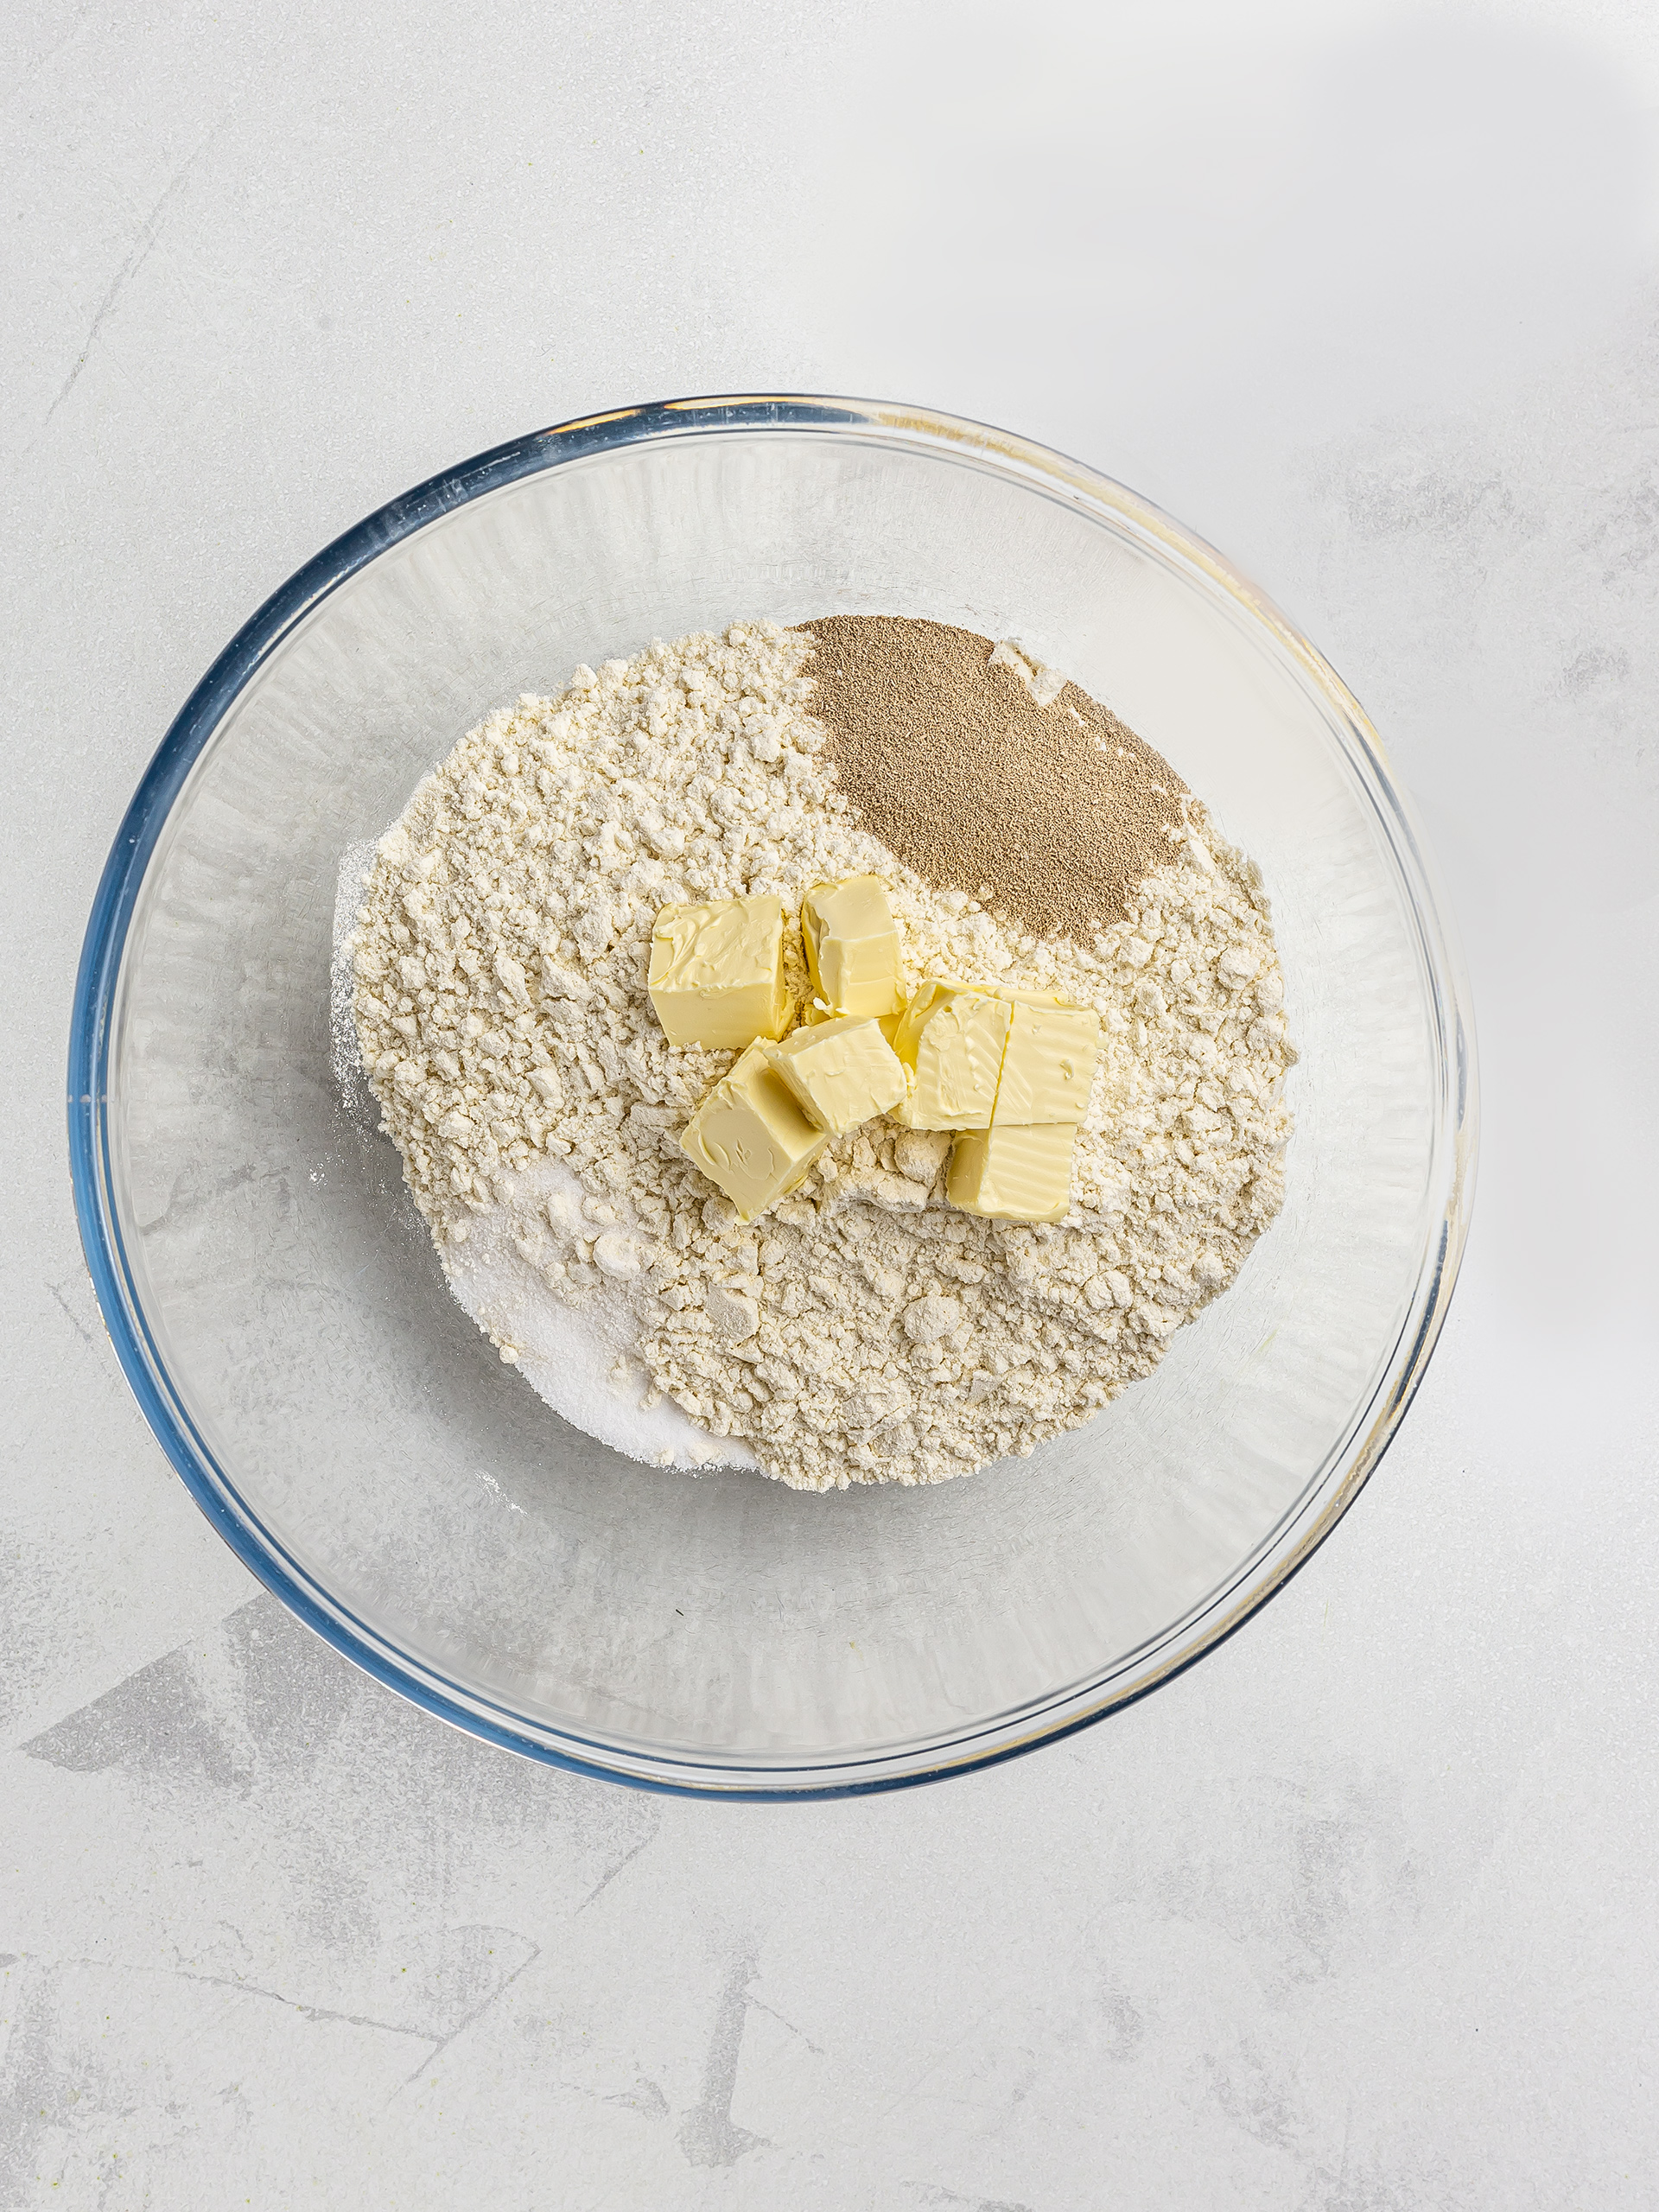 flour yeast and vegan butter in a bowl for pastry dough